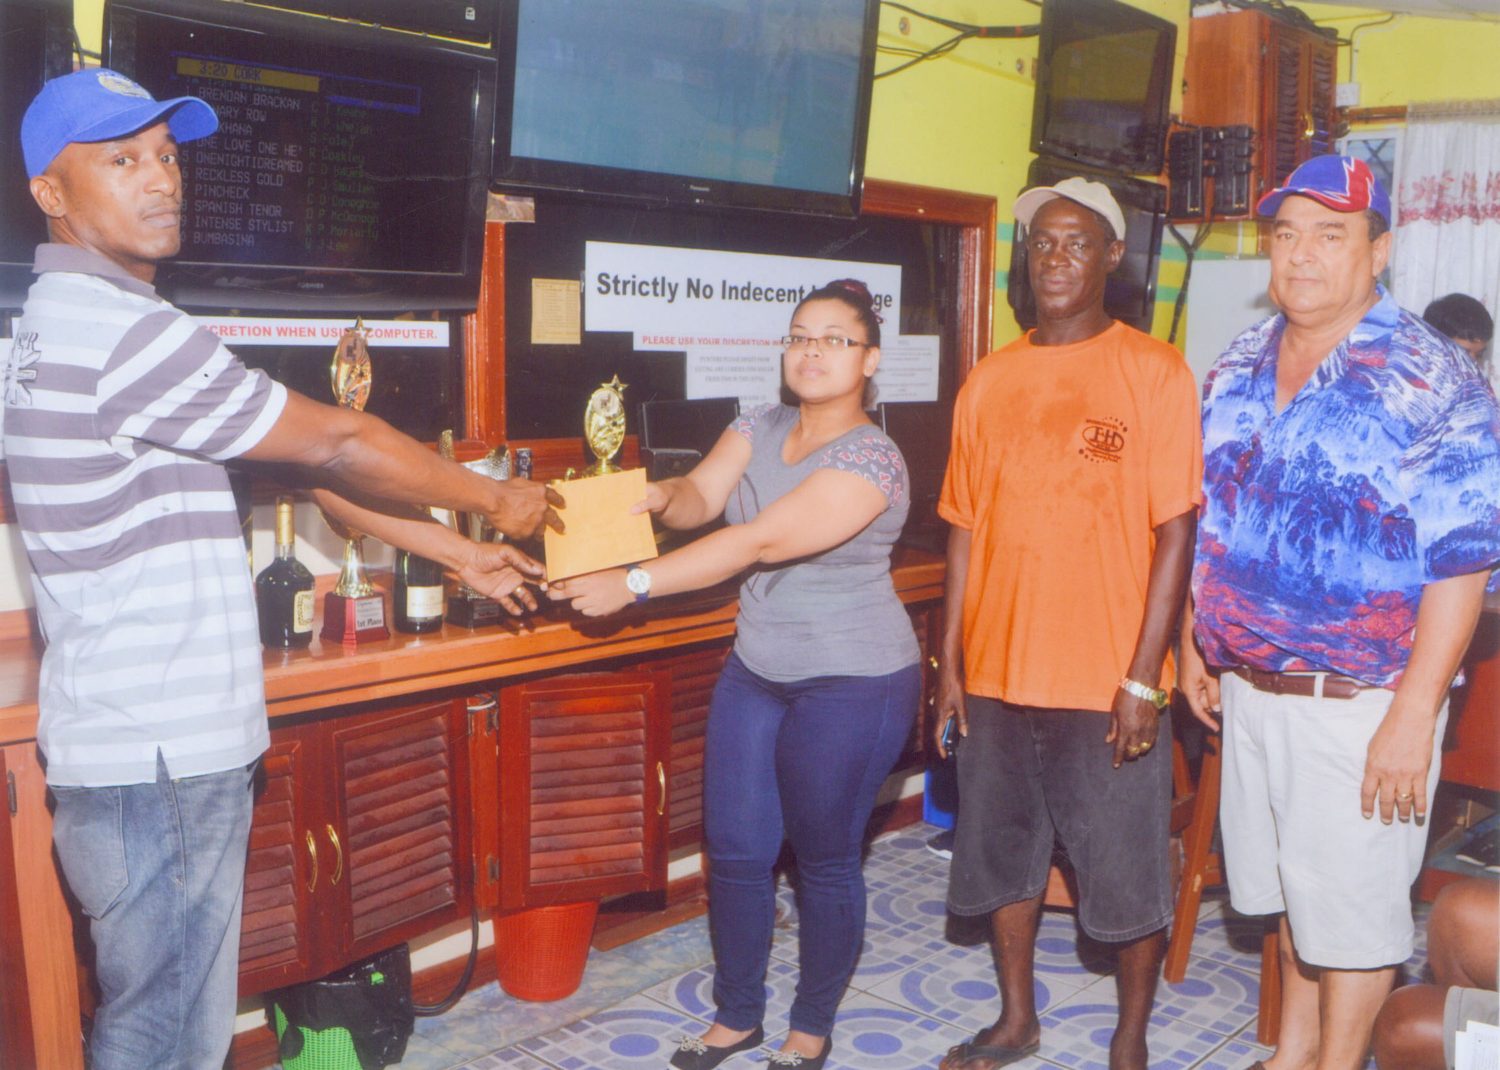 Chief Steward Kevin Boston receives the trophies from Tiffany Solomon, Office Manager of All Seasons.  At right is All Seasons proprietor Raymond Alli and next to him Mark Wiltshire.